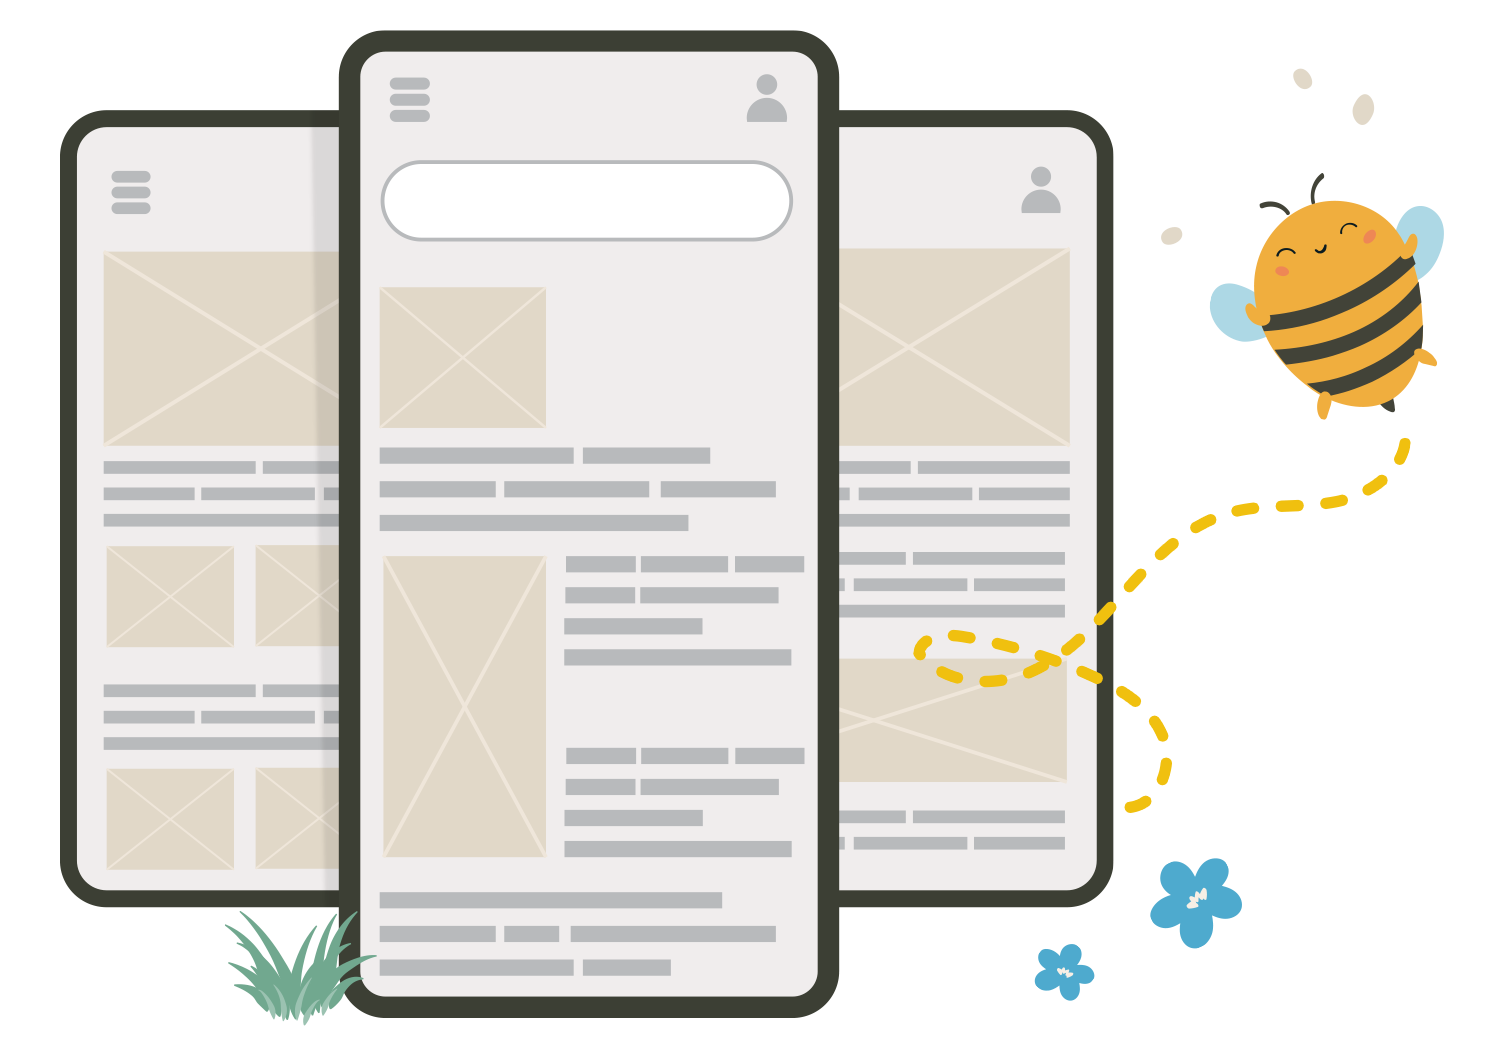 Template of an application layout for mobile usability testing